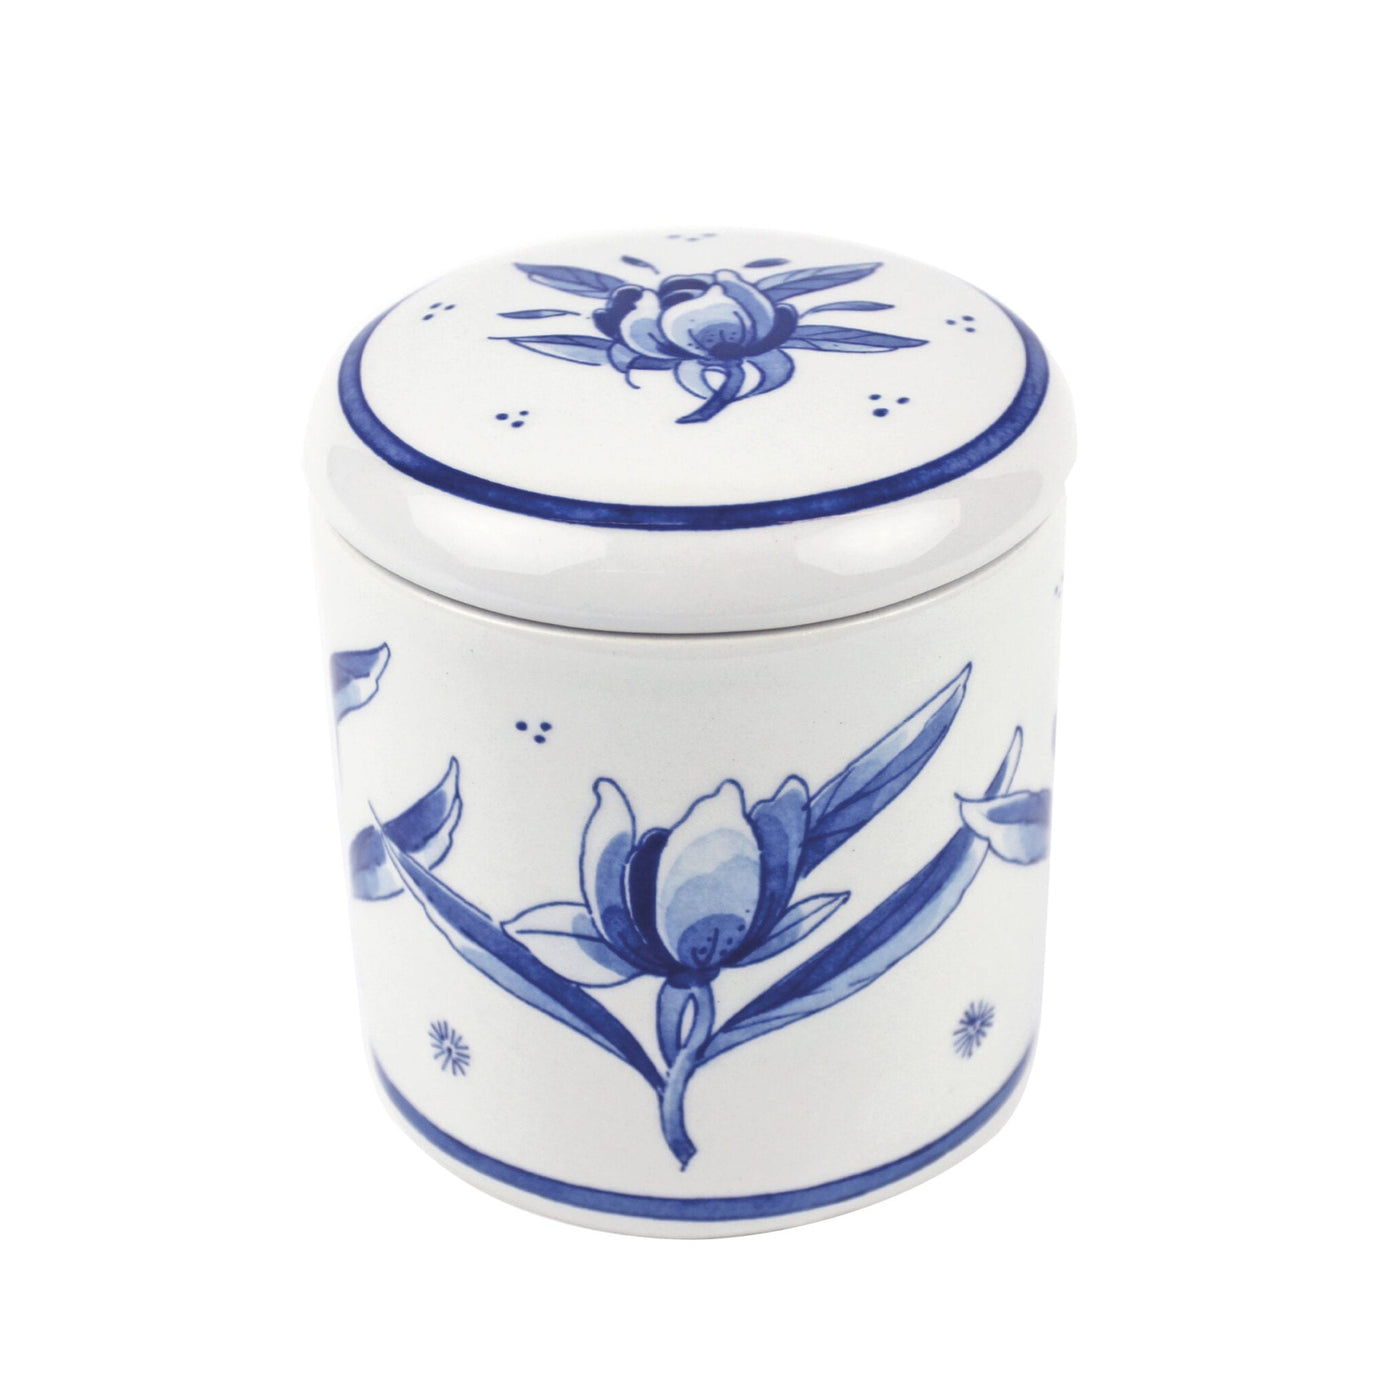 Cookie Jar Tulips Delft Blue by Royal Delft